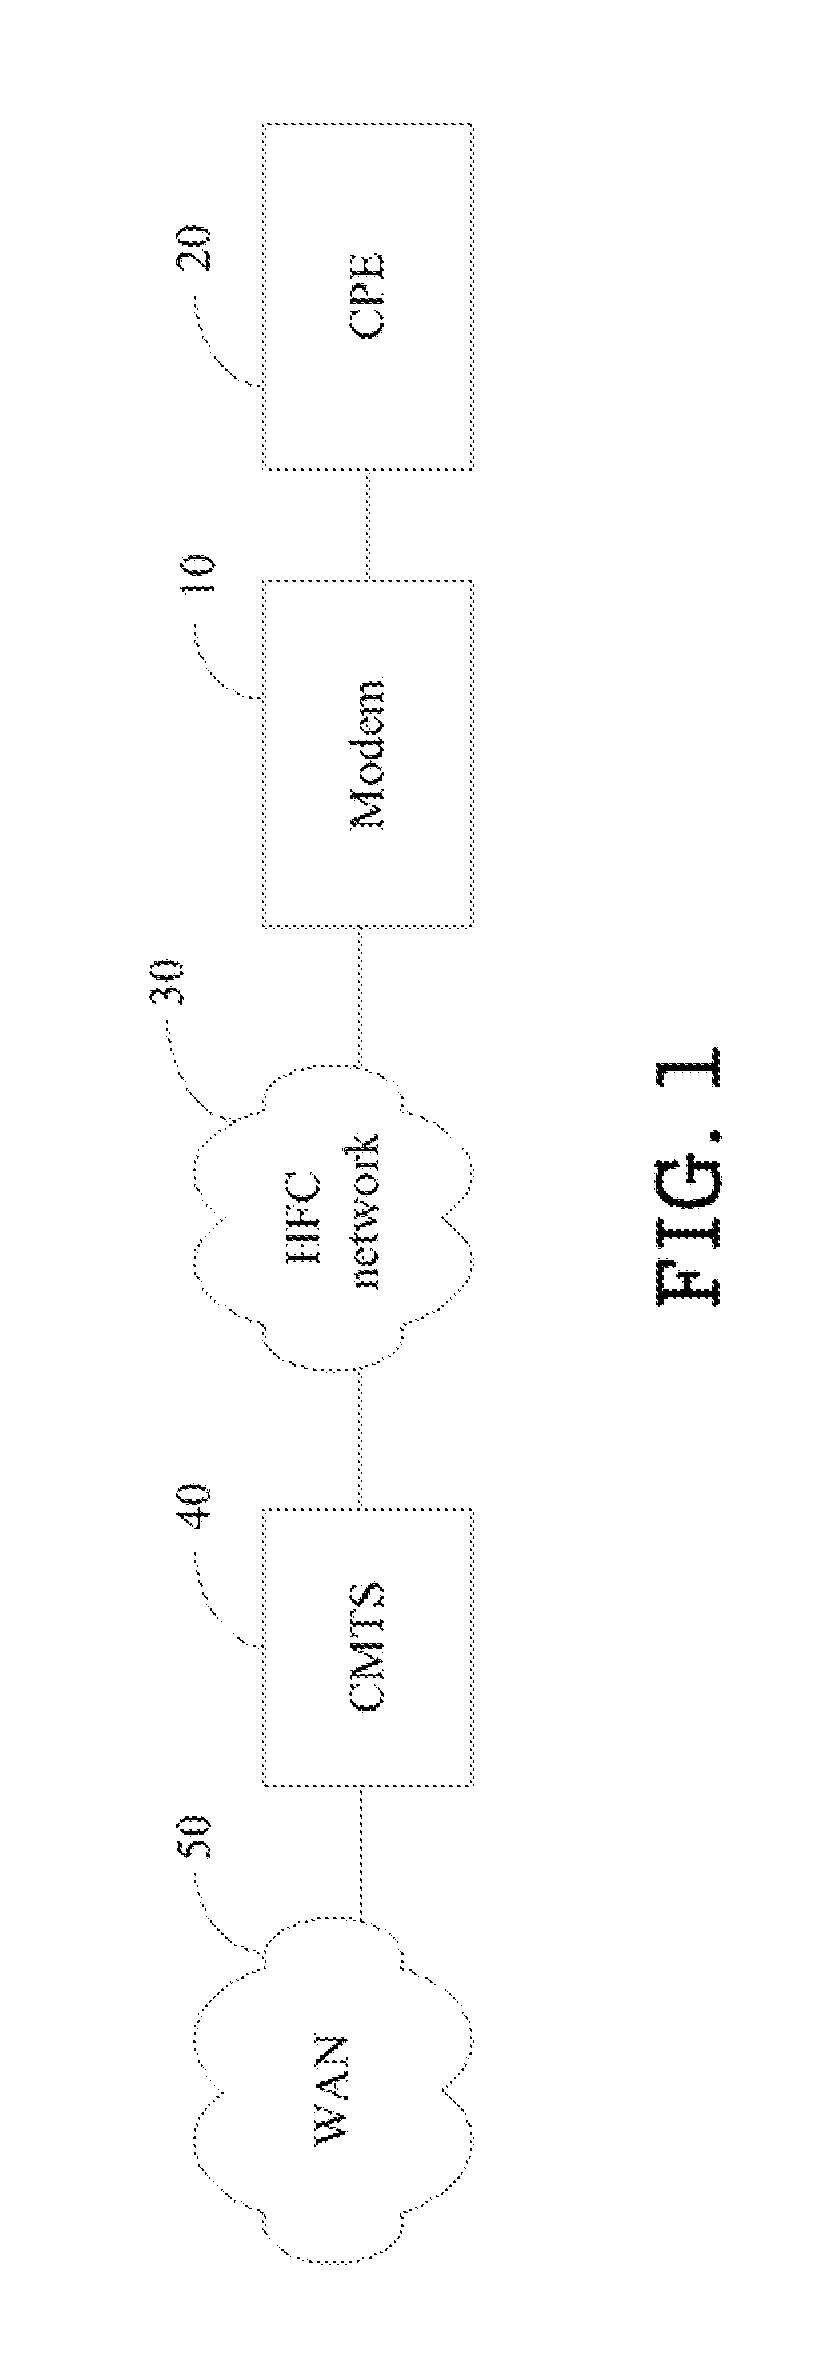 Modem and method for switching operation modes thereof